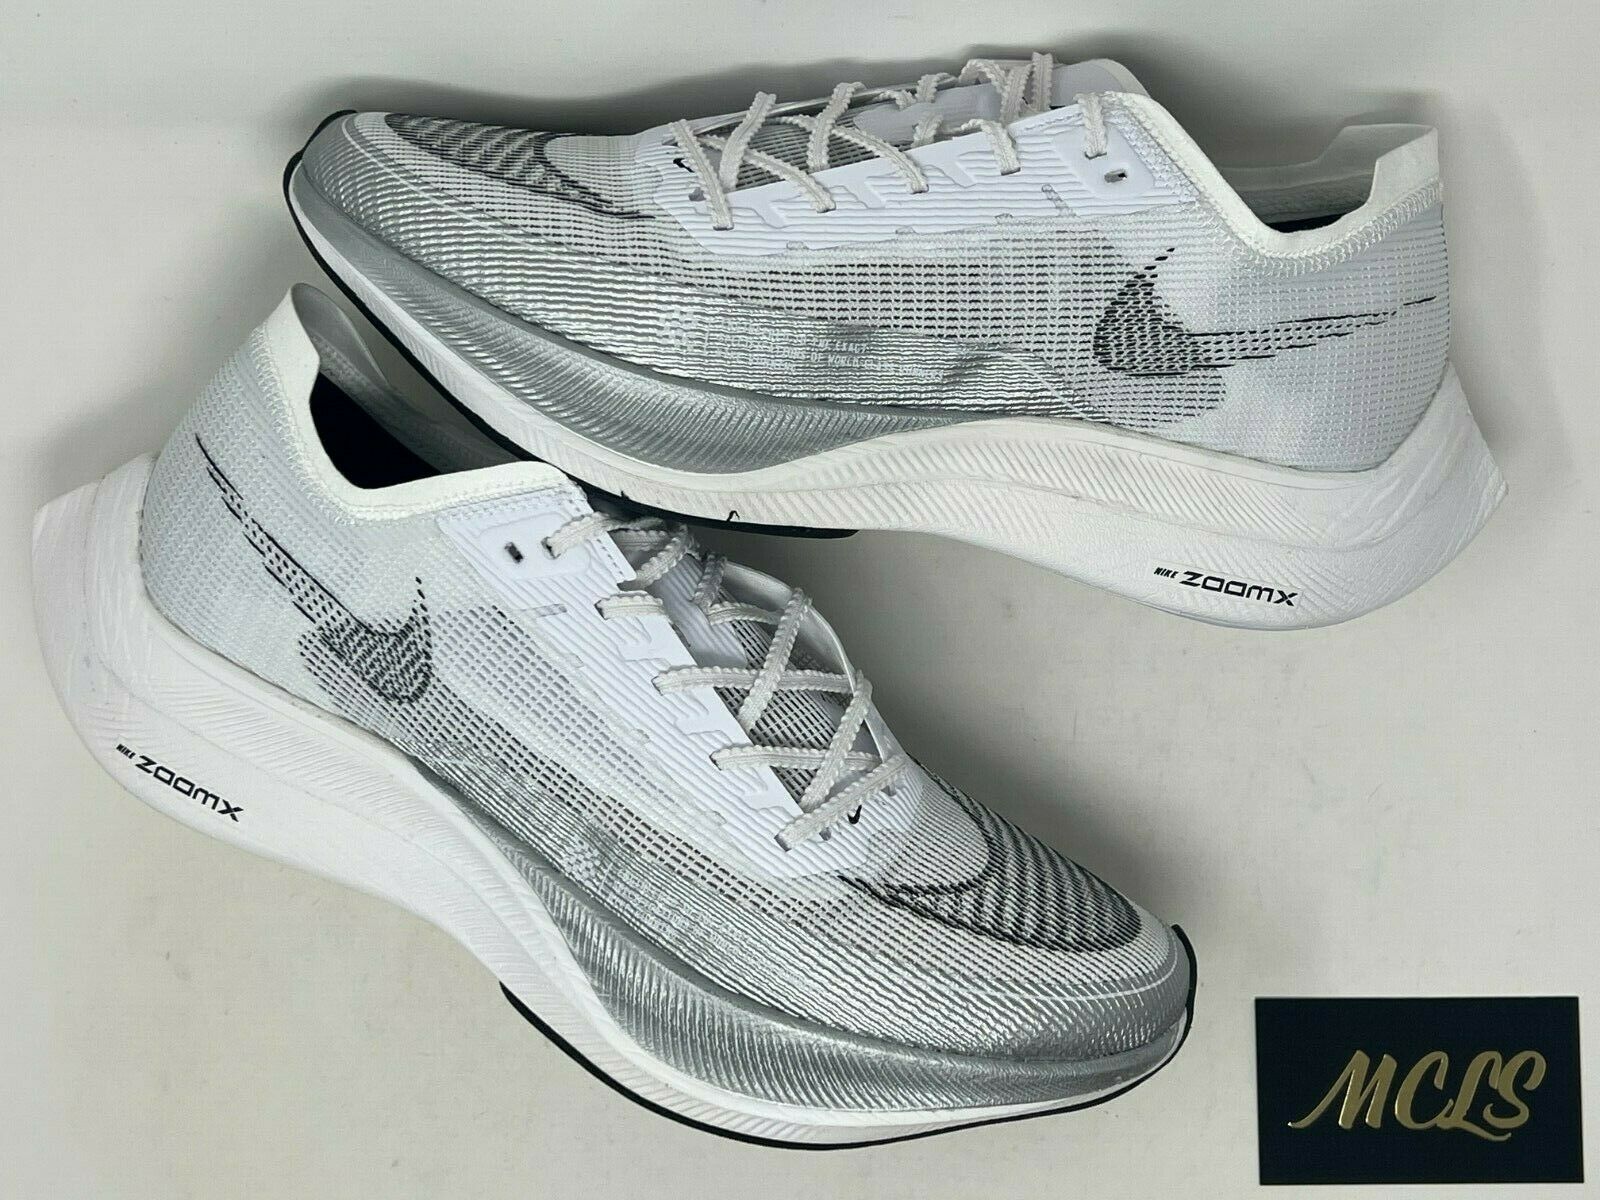 New Nike Zoom X Vaporfly Next% 2 Silver CU4111-100 Men's Size 11 Running Shoes